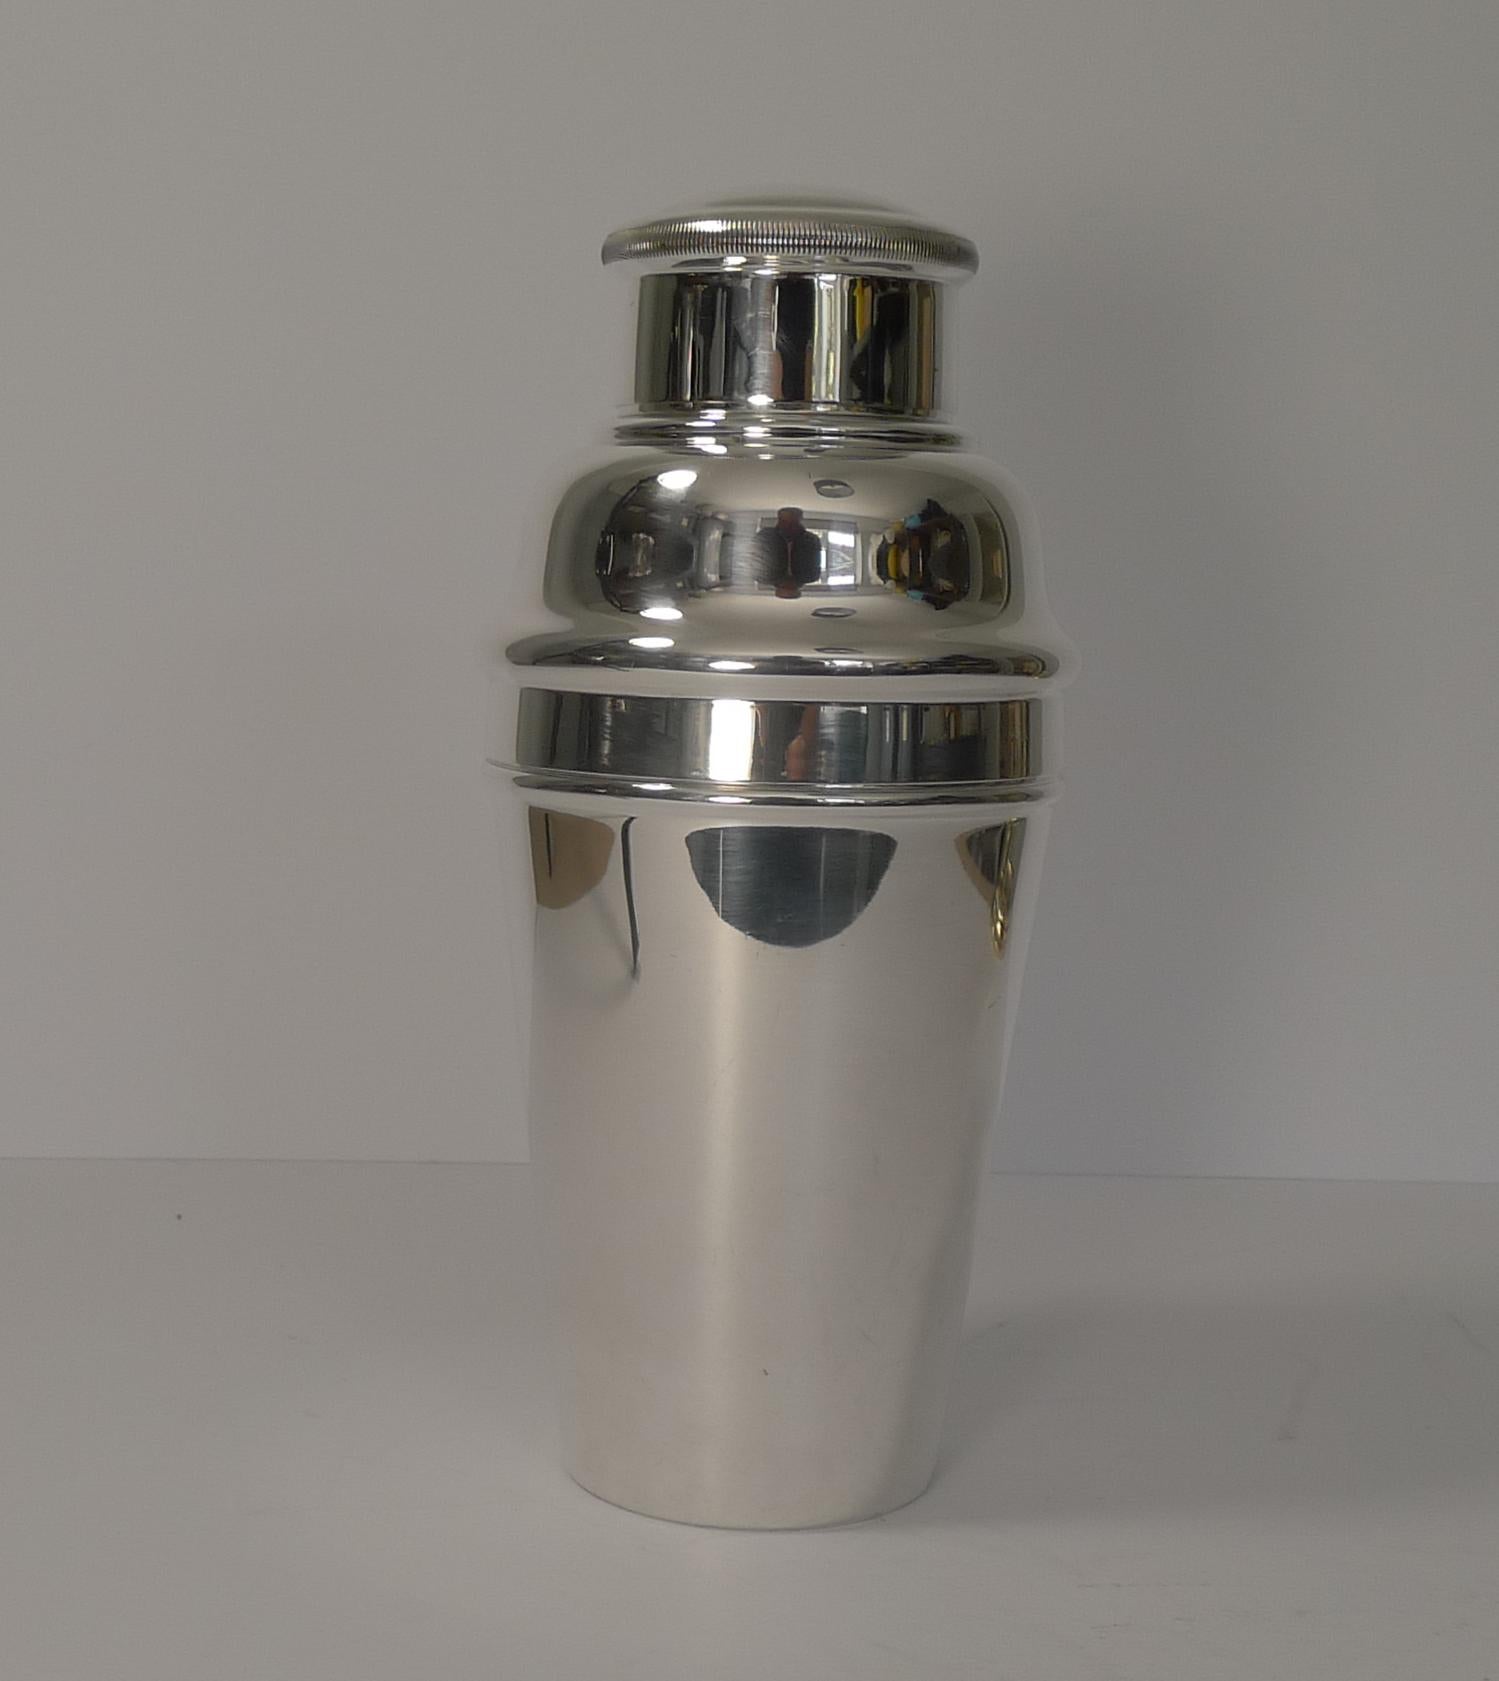 A fabulous large cocktail shaker dating to the Art Deco period, circa 1930

Just back from our silversmiths where it has been professionally restored to it's former glory, cleaned and polished, it is in lovely clean condition.

The top removed to